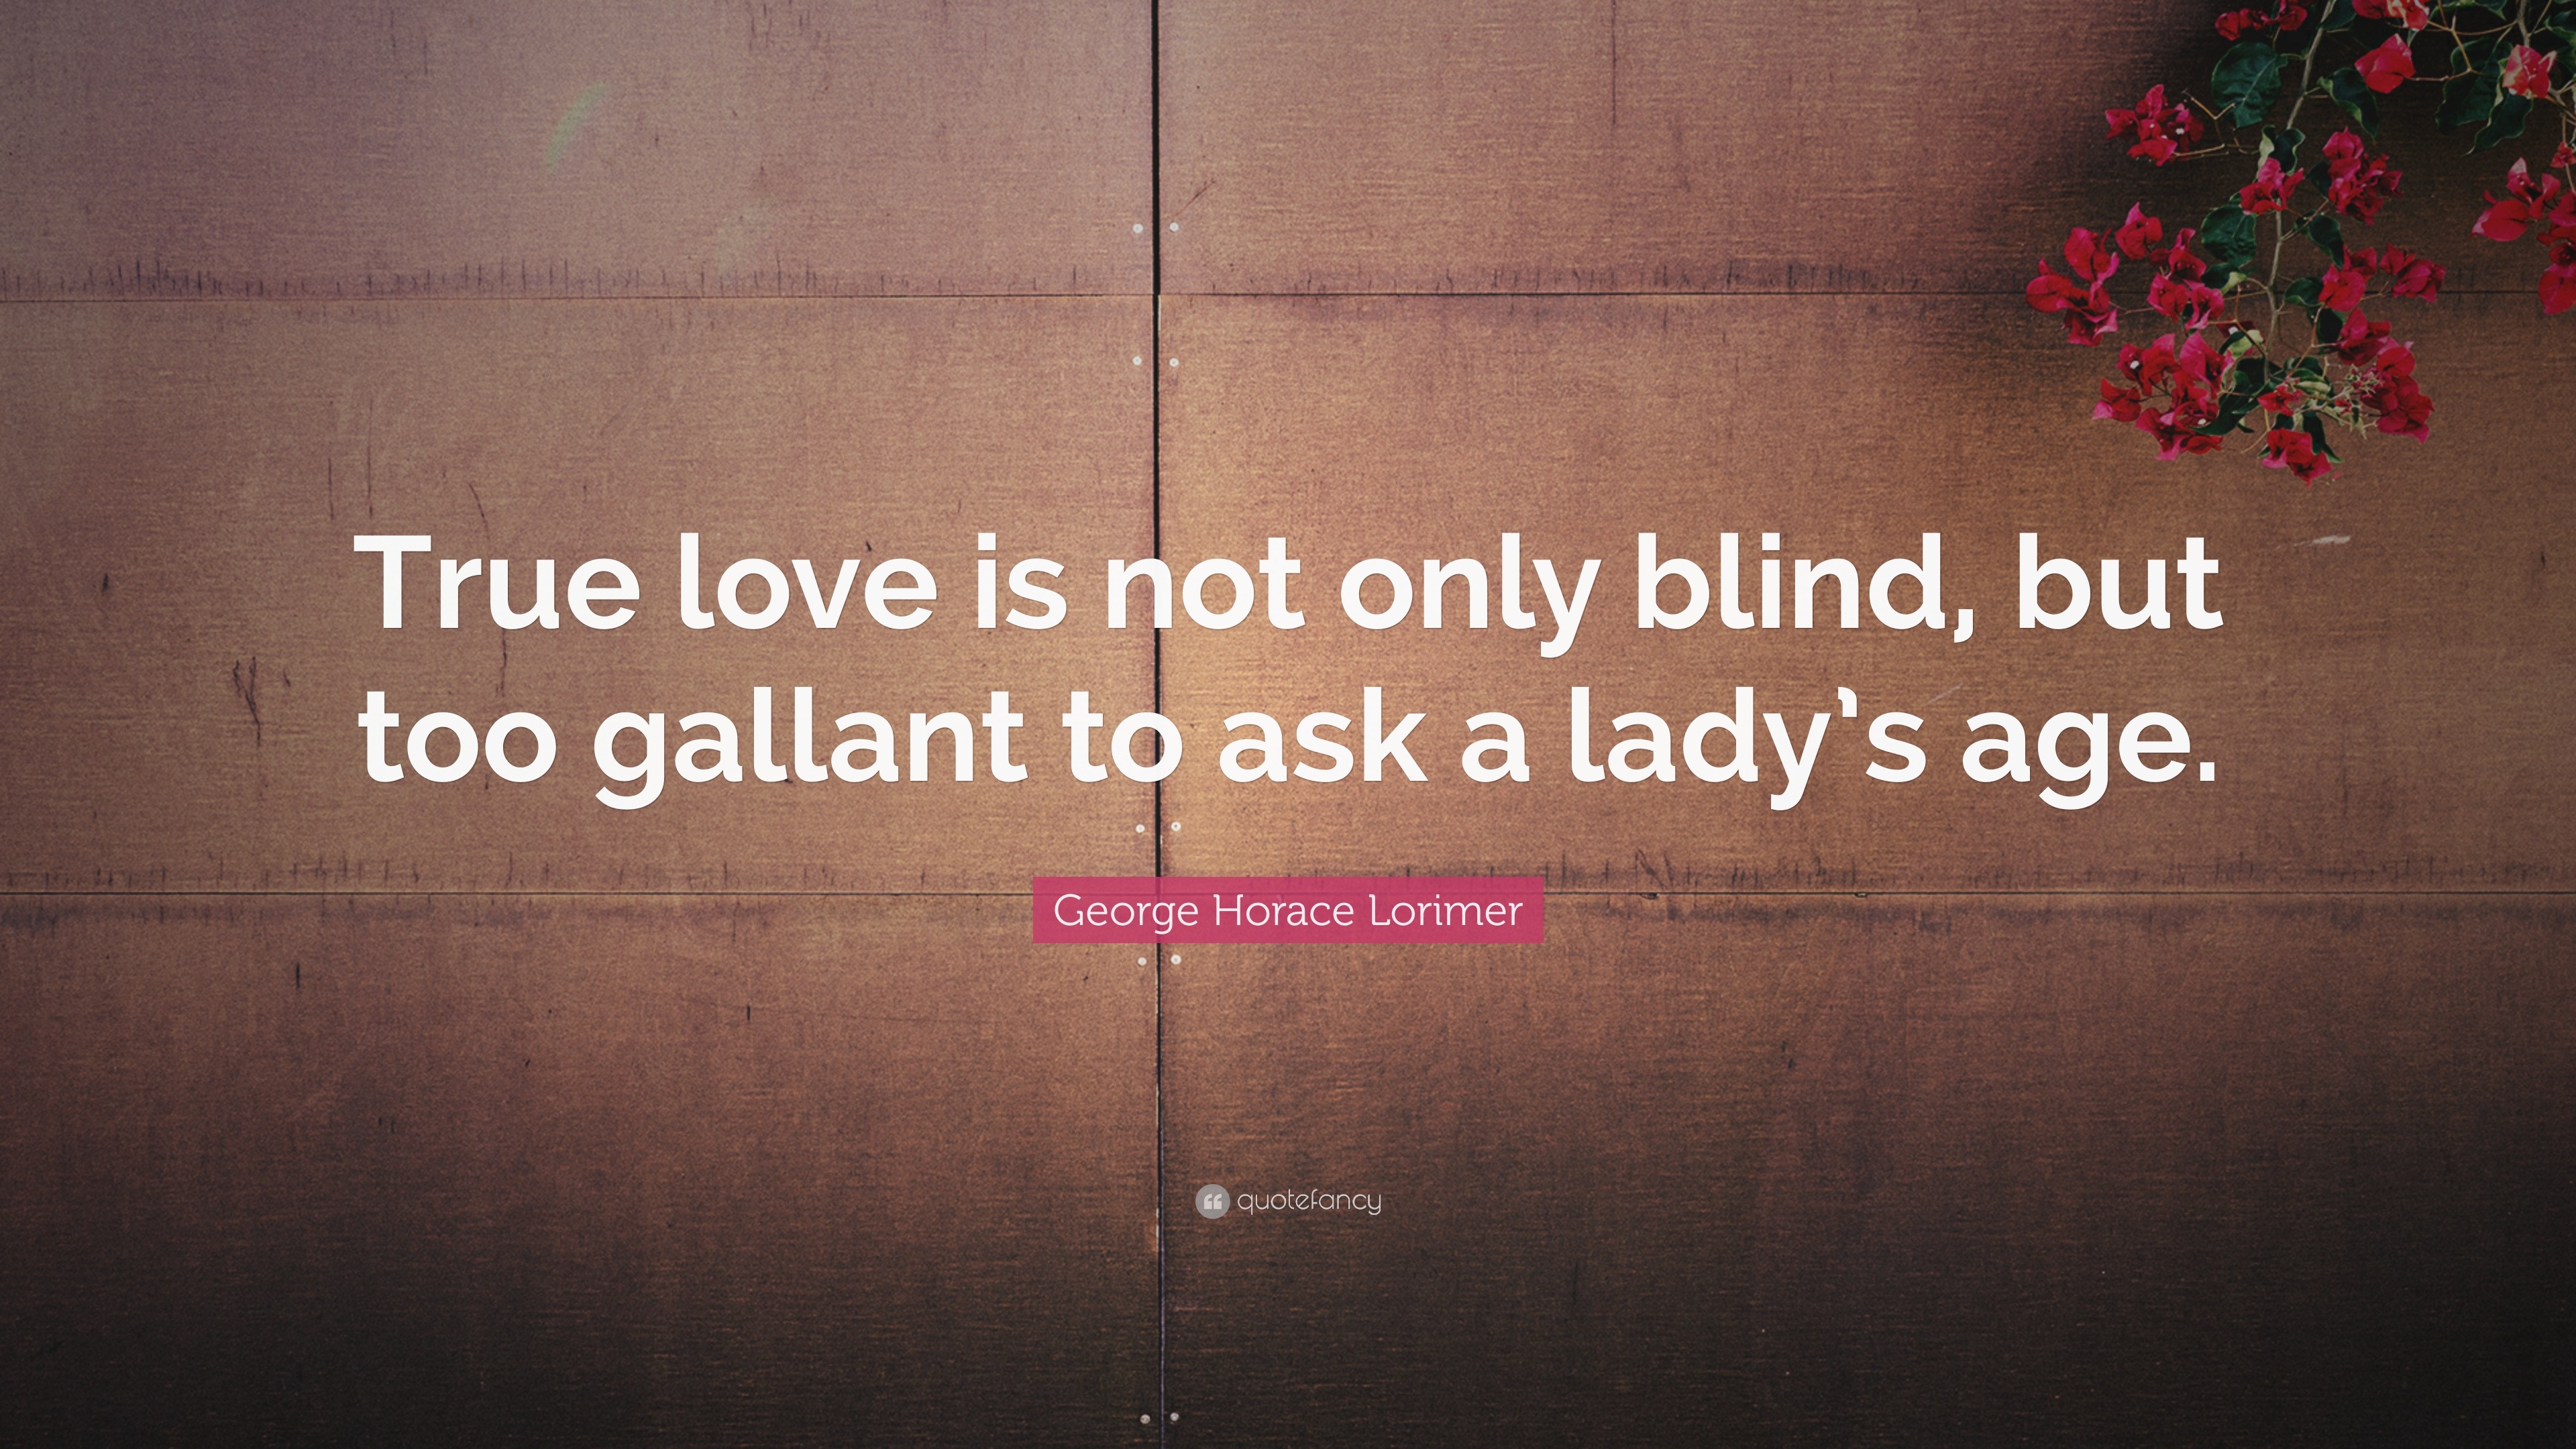 George Horace Lorimer Quote “True love is not only blind but too gallant